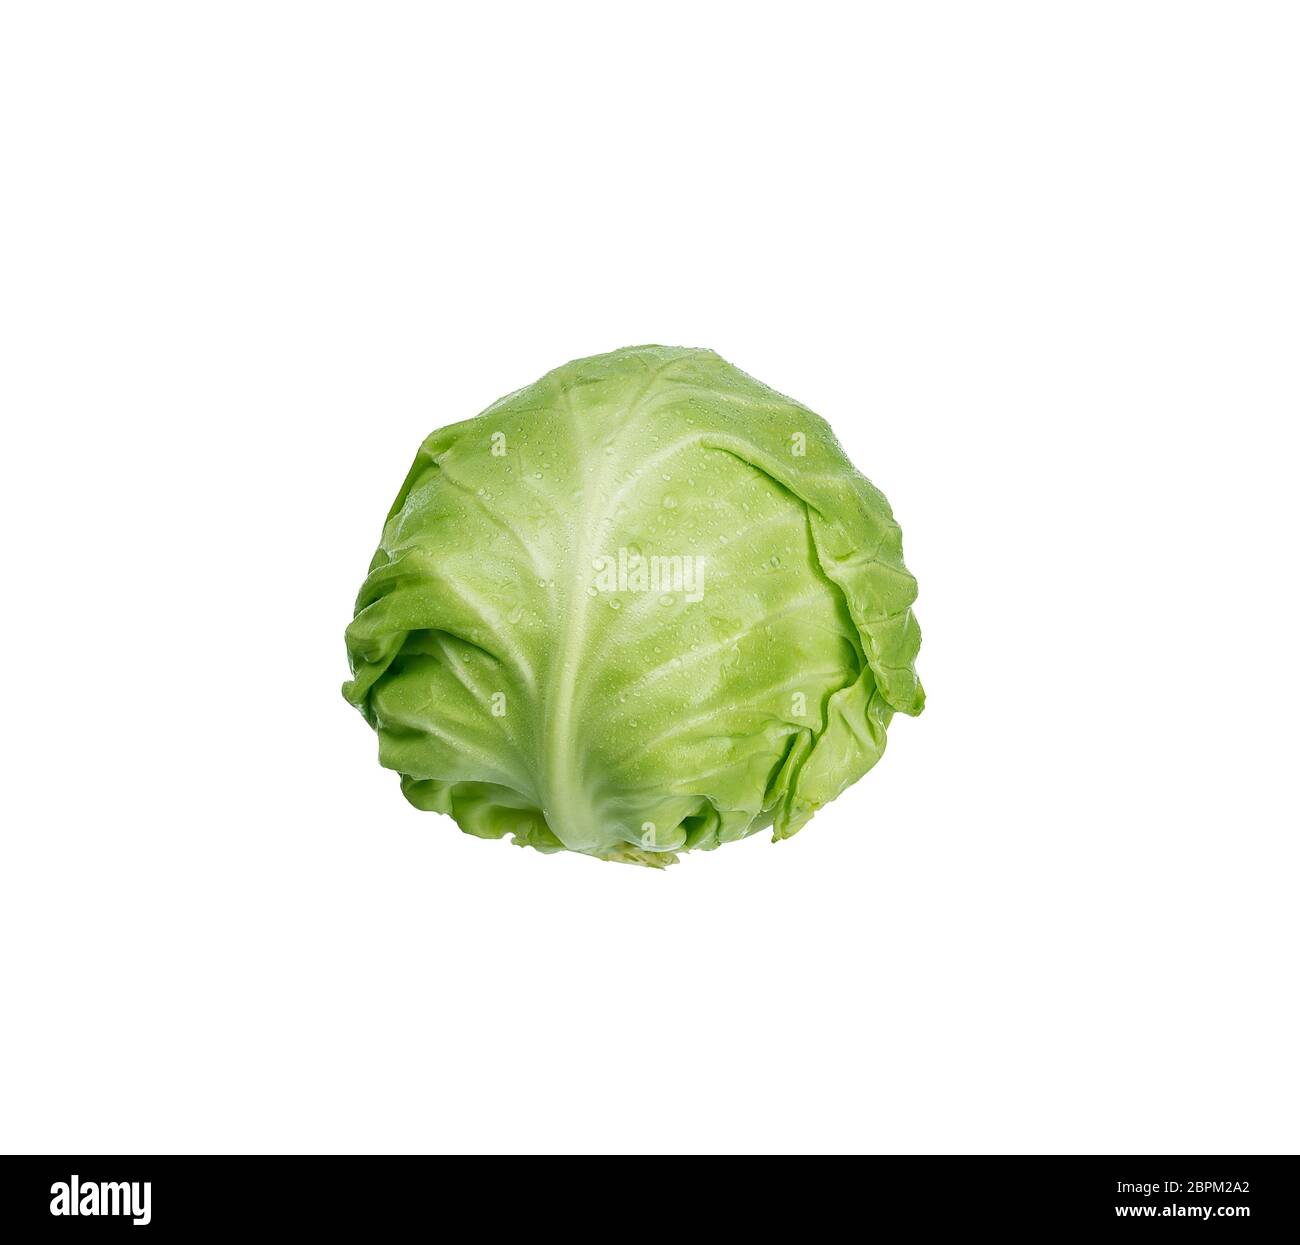 Broccoli isolate Cut Out Stock Images & Pictures - Page 2 - Alamy